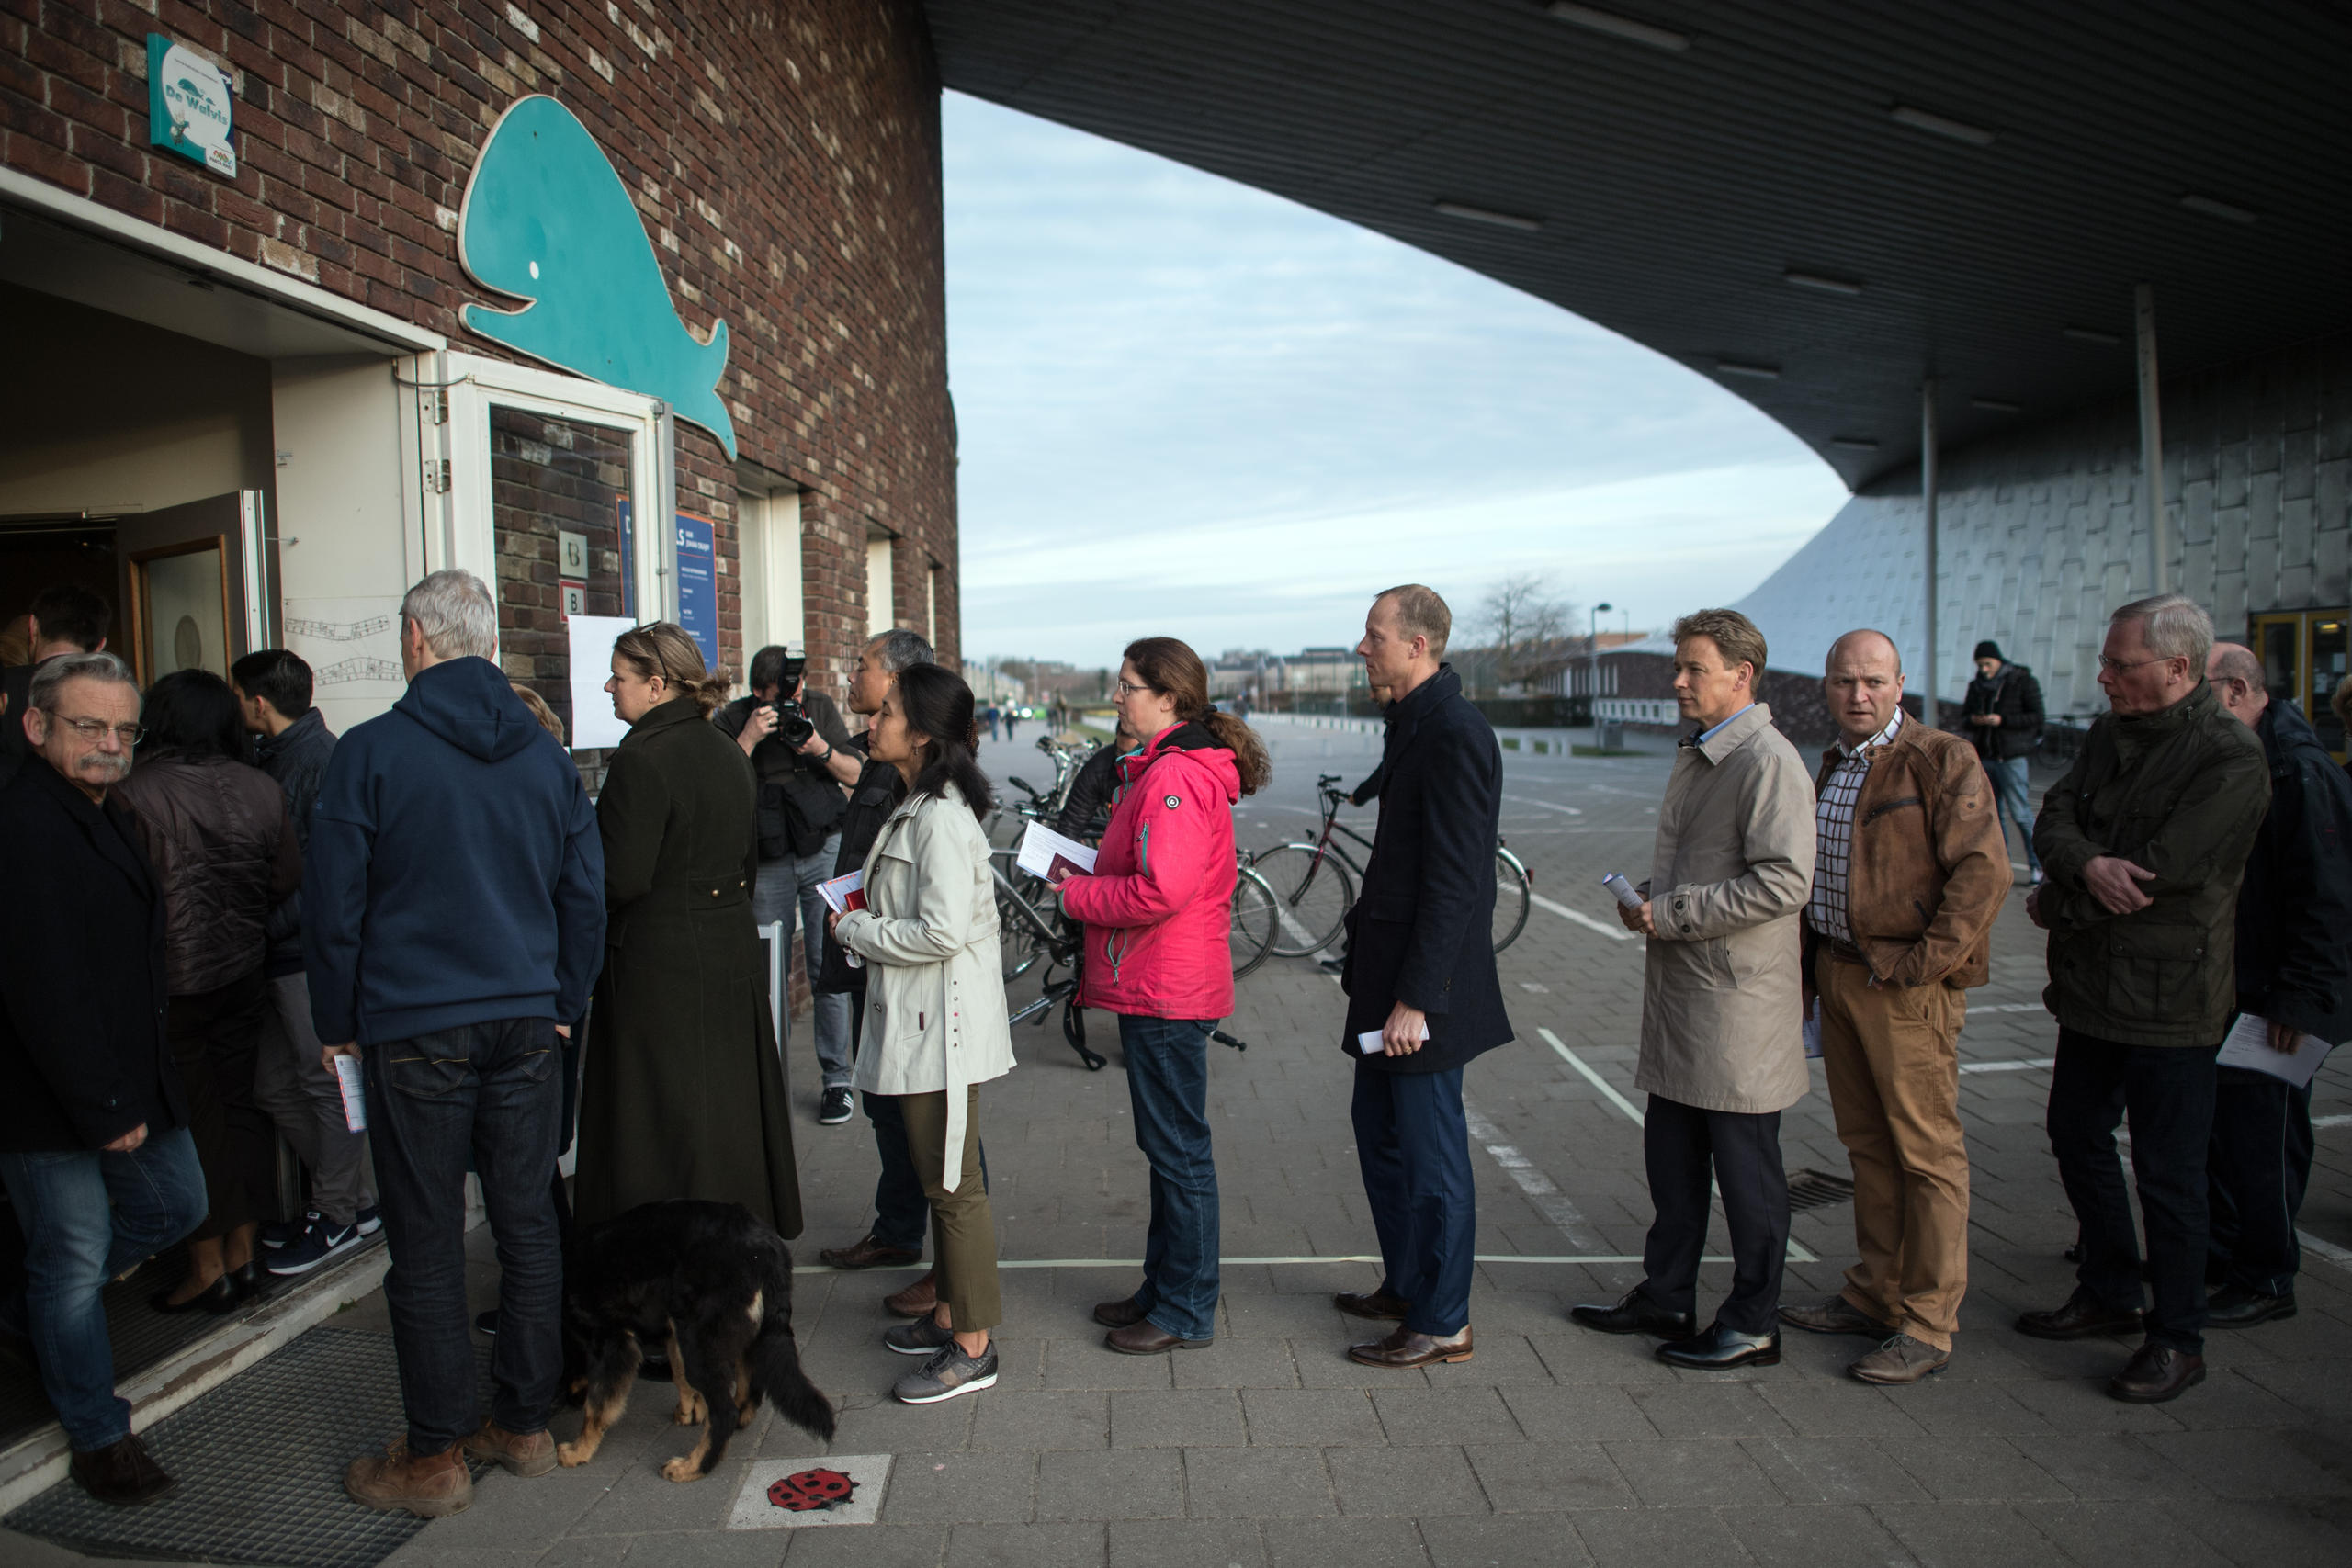 Voters in the Netherlands queuing outside a polling station